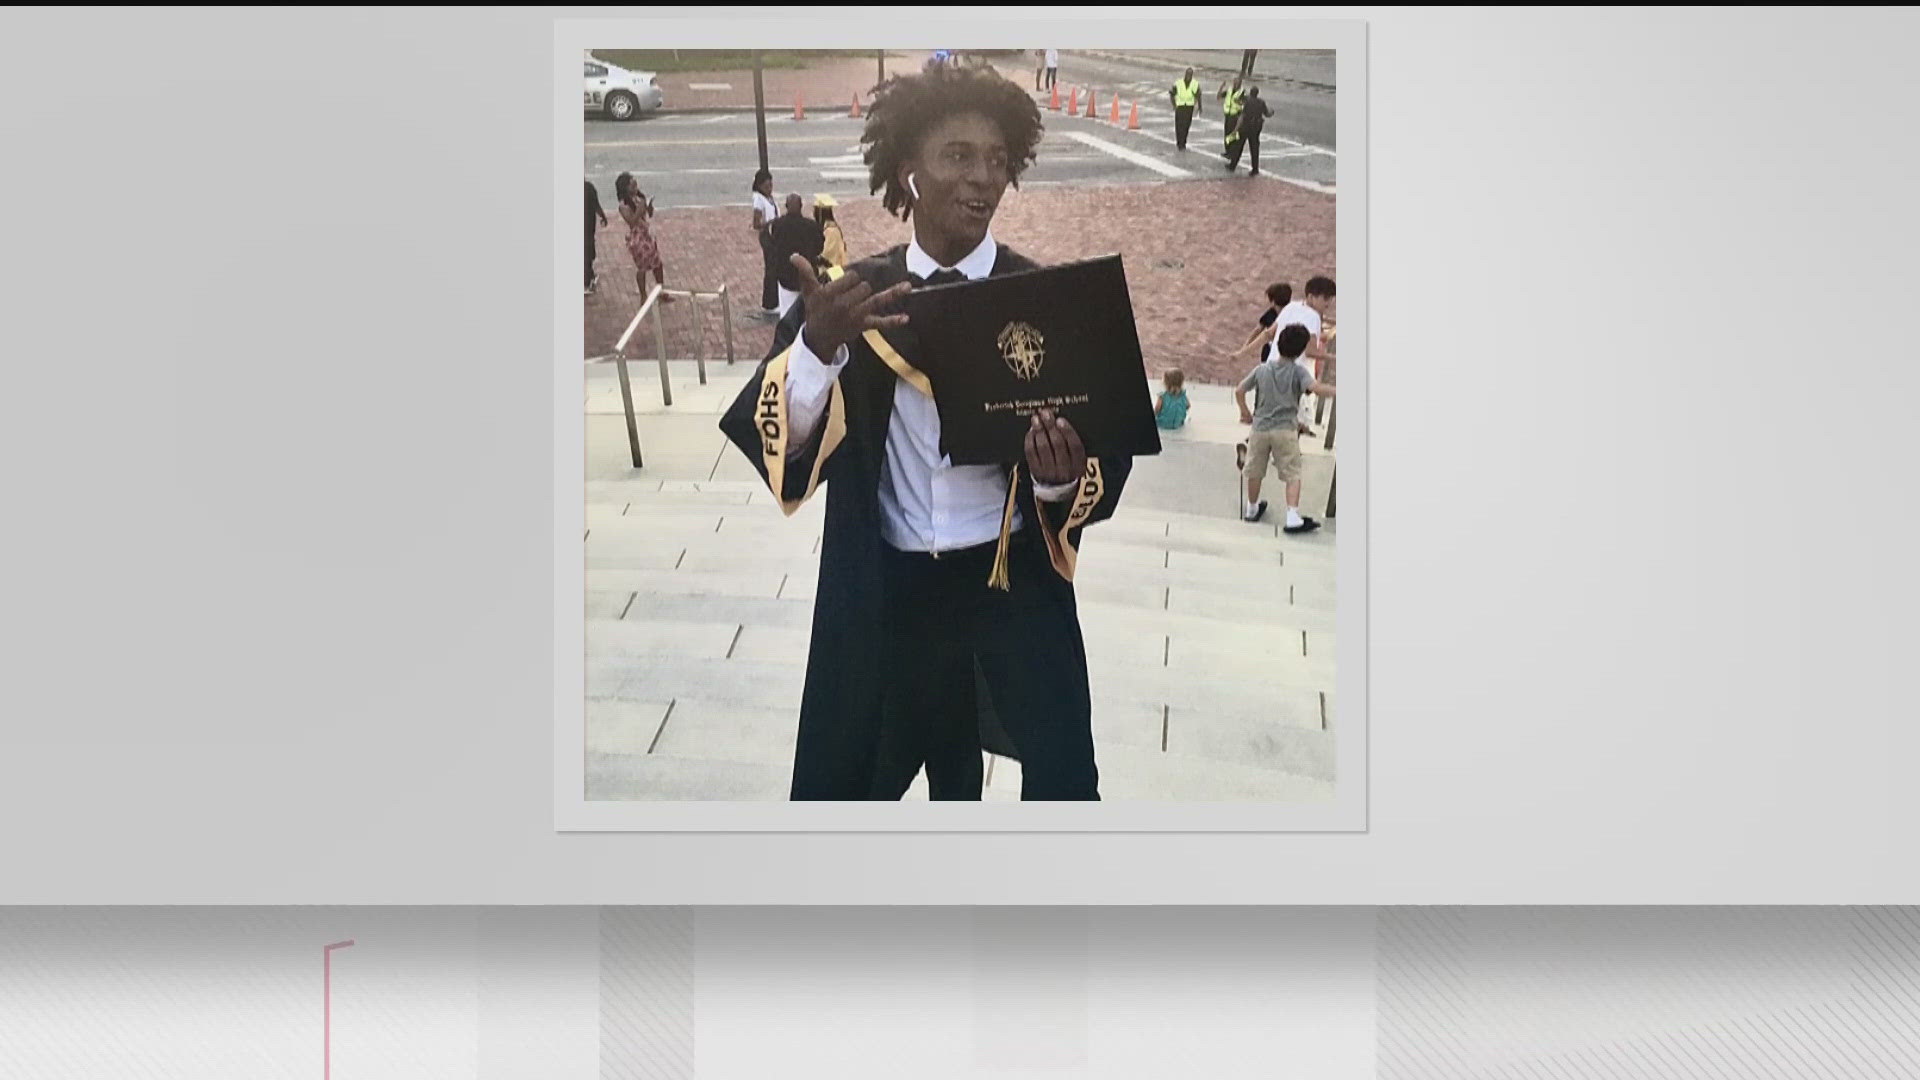 In June 2020, 18-year-old Jalanni Pless was shot and killed while selling bottles of water along 8th Street in Midtown. Police said he was shot over a $10 bill.